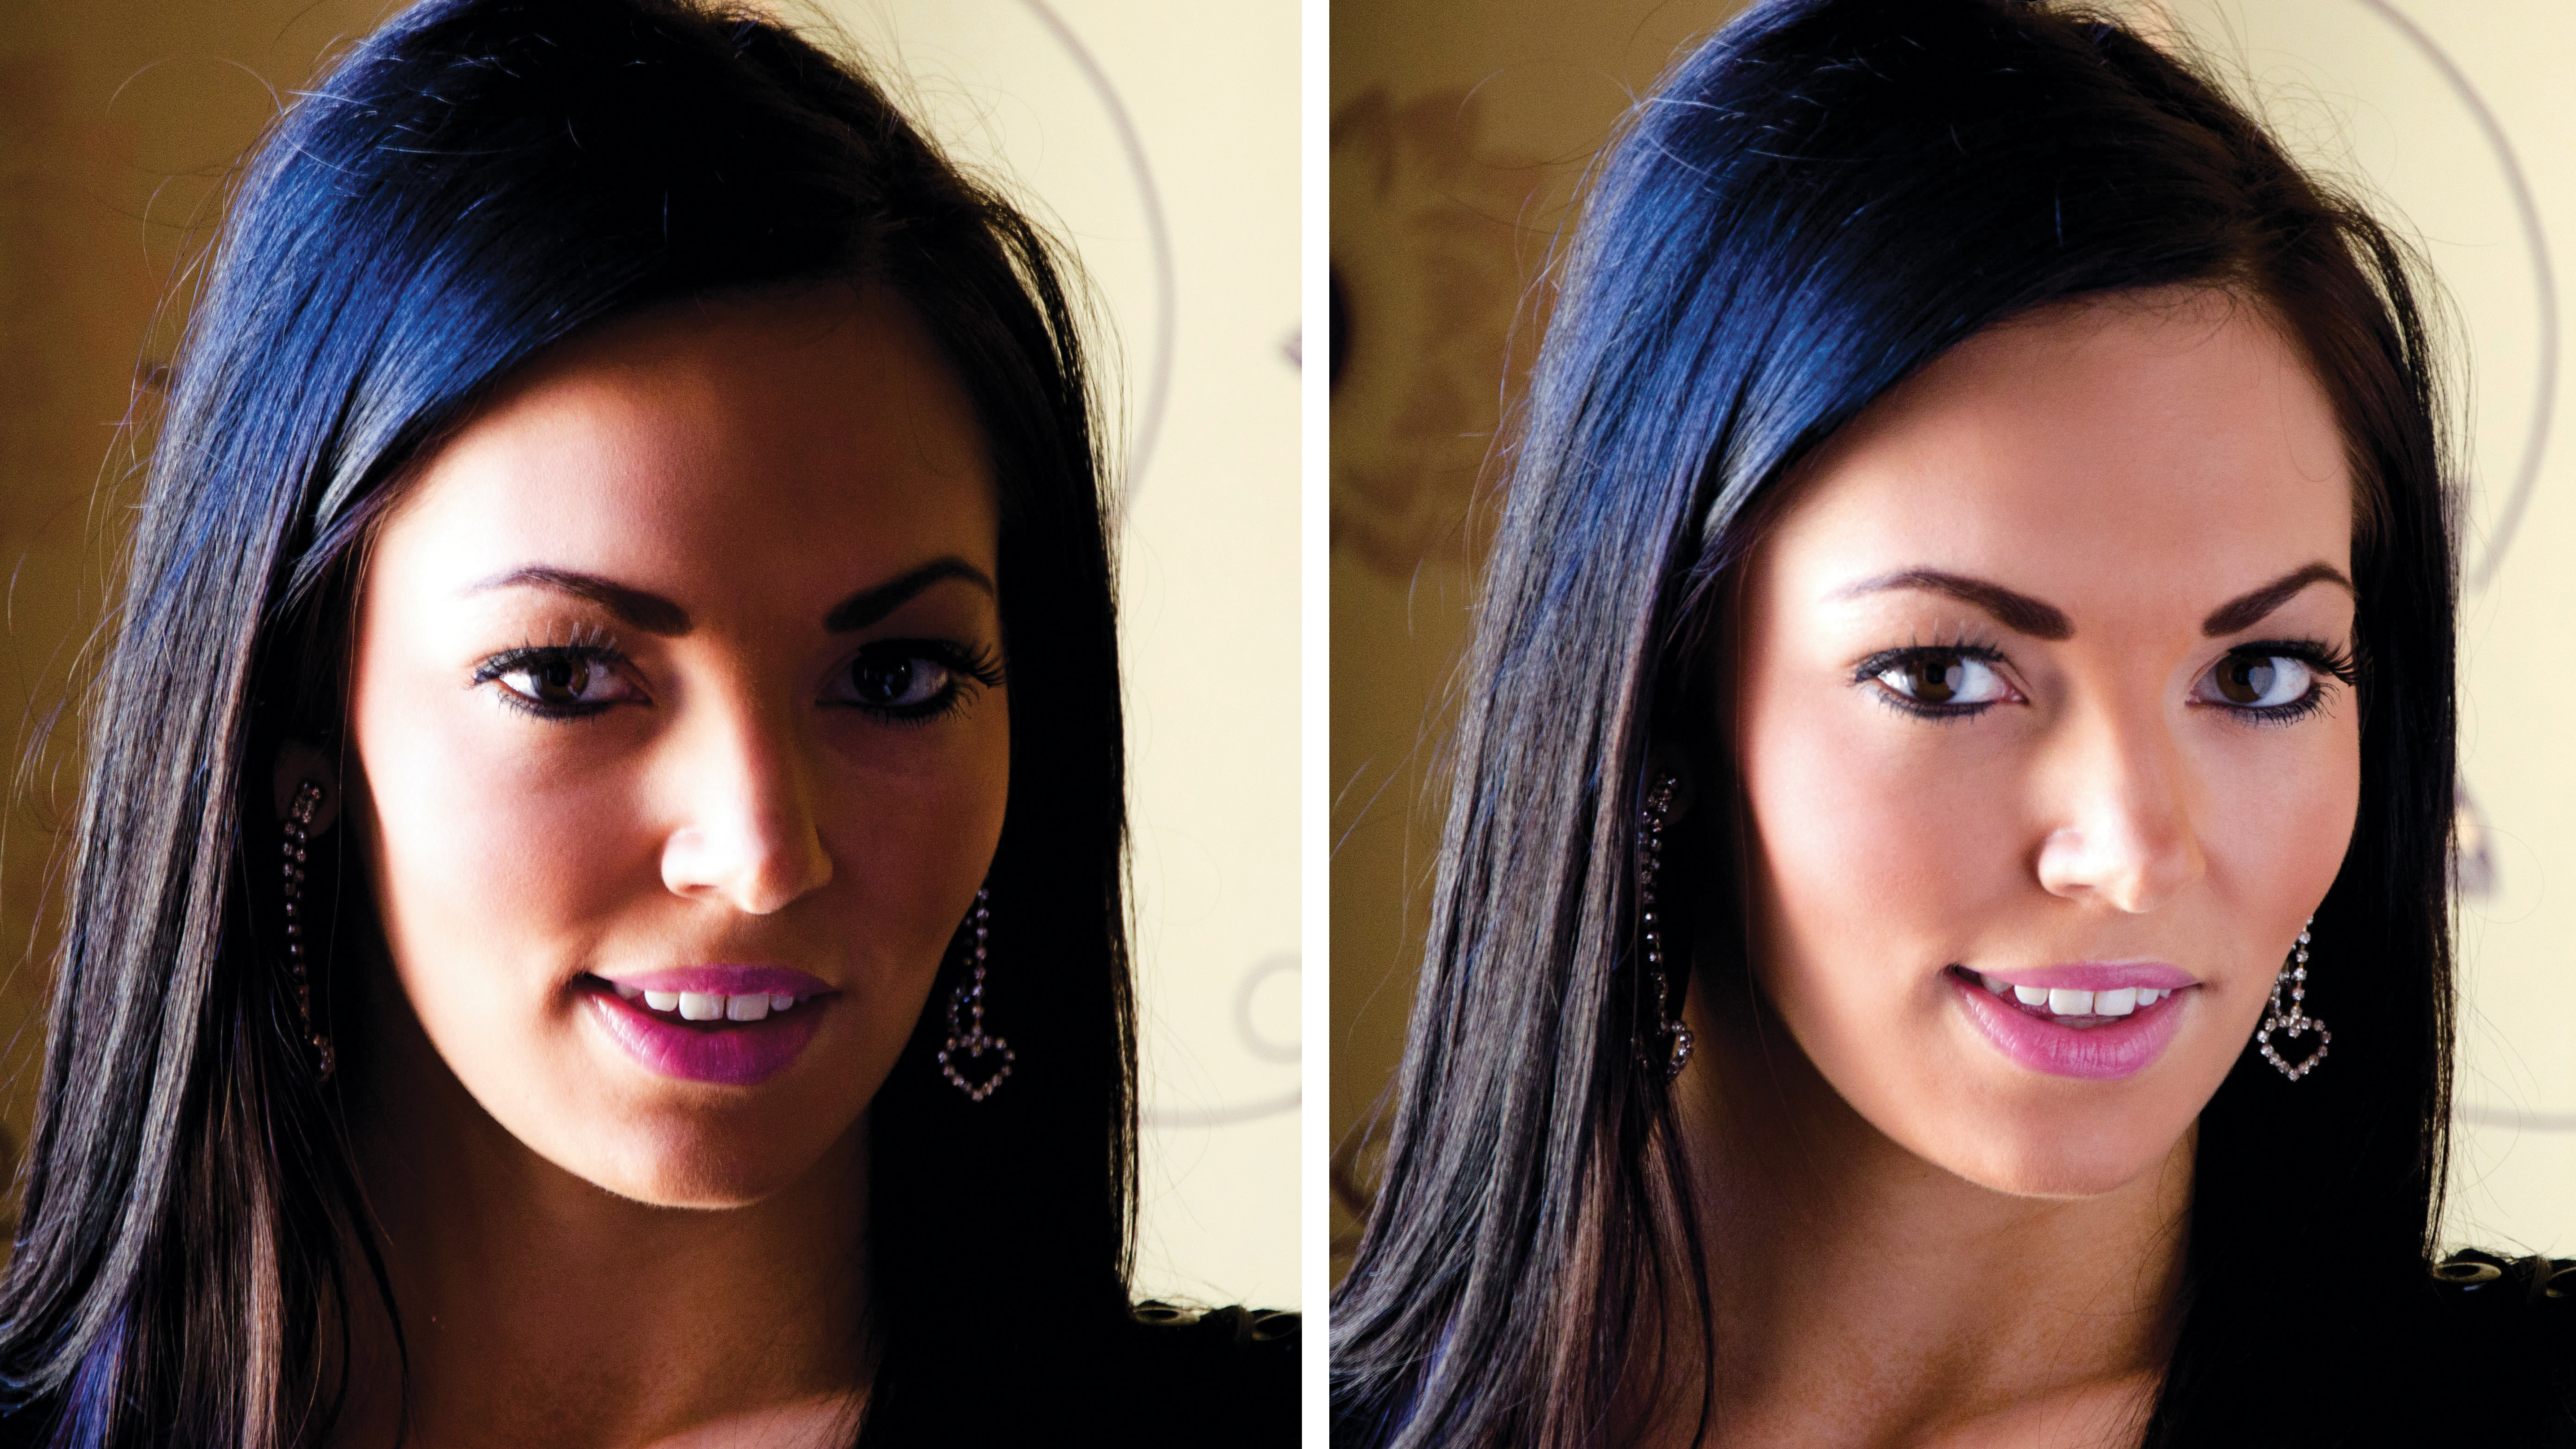 A reflector immediately improves a portrait lit by natural or ambient light. In the shot on the left (without the reflector) the shadows are strong and unflattering. In the shot on the right (with the reflector) the shadows are much softer, showing more facial detail and providing a more pleasing picture.